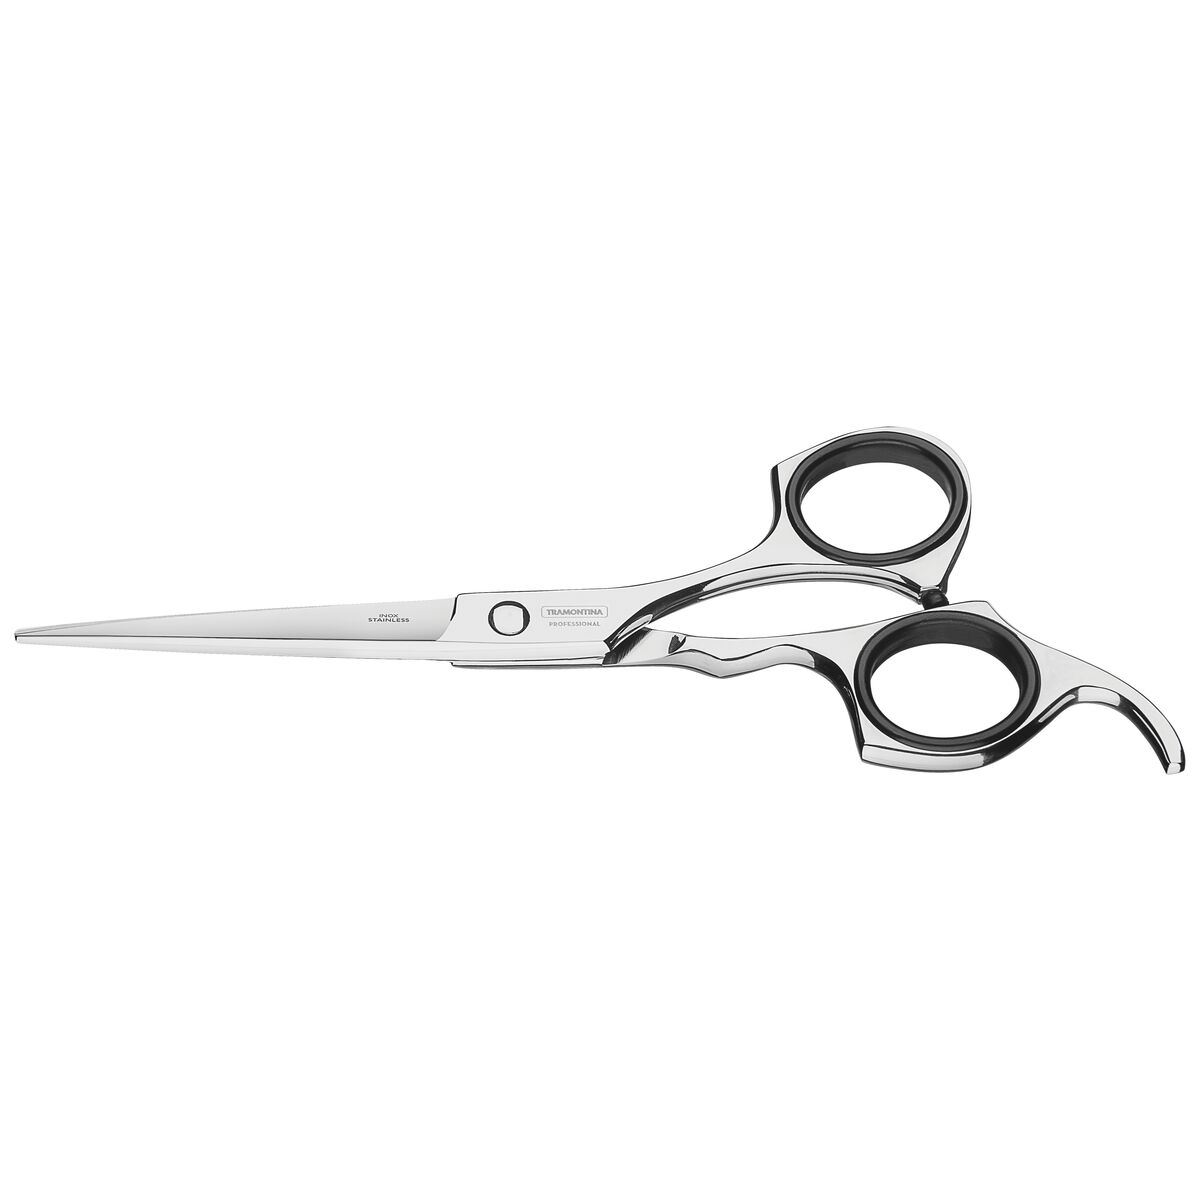 Tramontina 6" stainless steel hair shears with laser-cut edge and fixed finger support